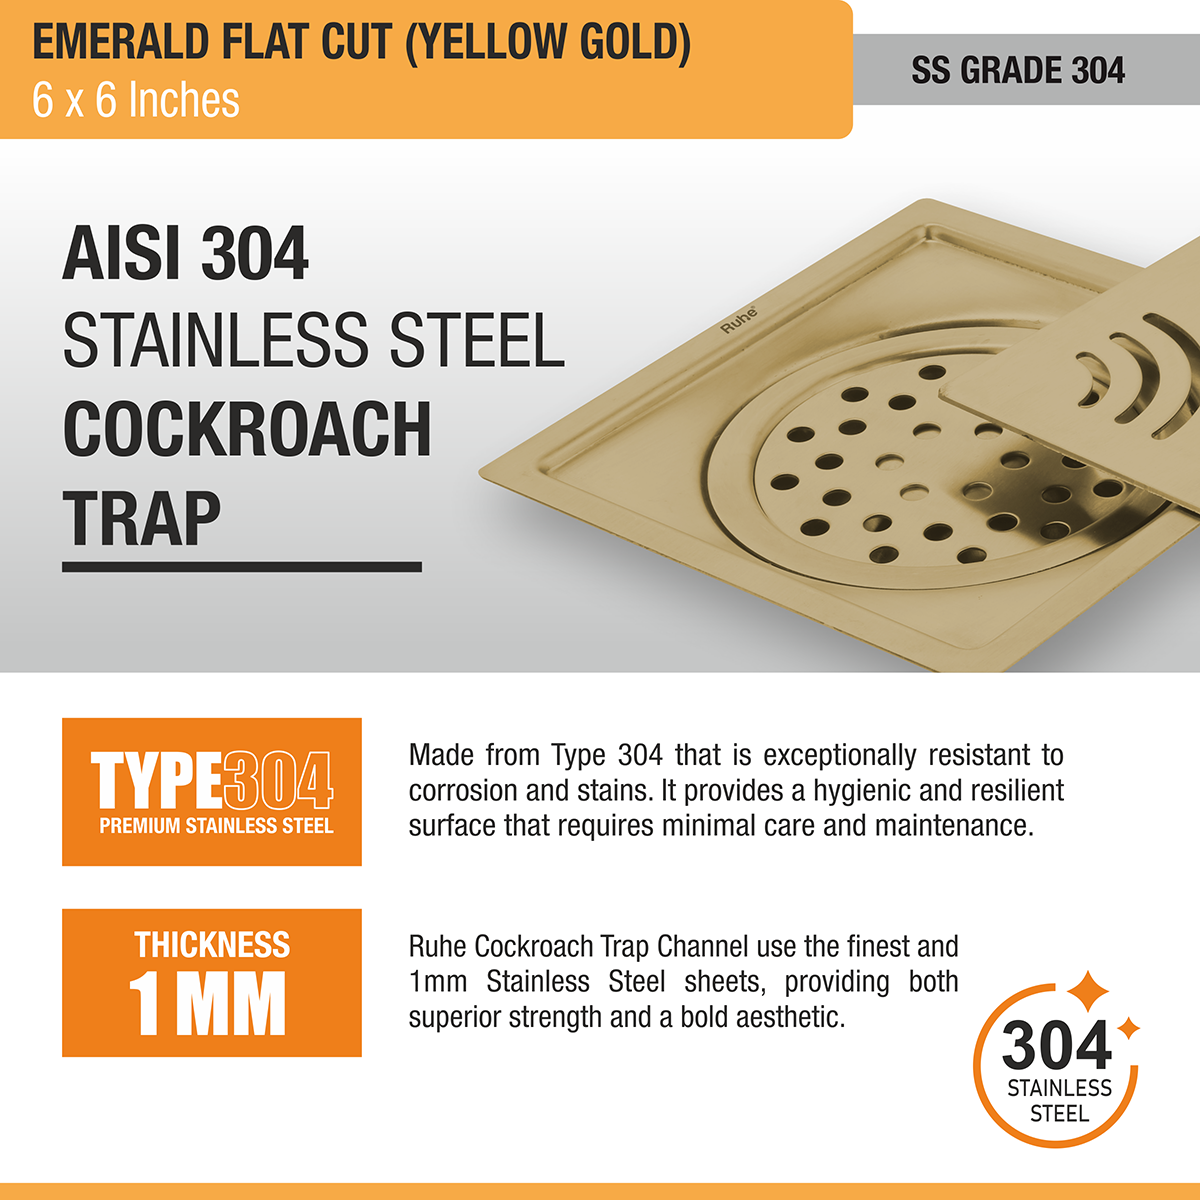 Emerald Square Flat Cut Floor Drain in Yellow Gold PVD Coating (6 x 6 Inches) stainless steel